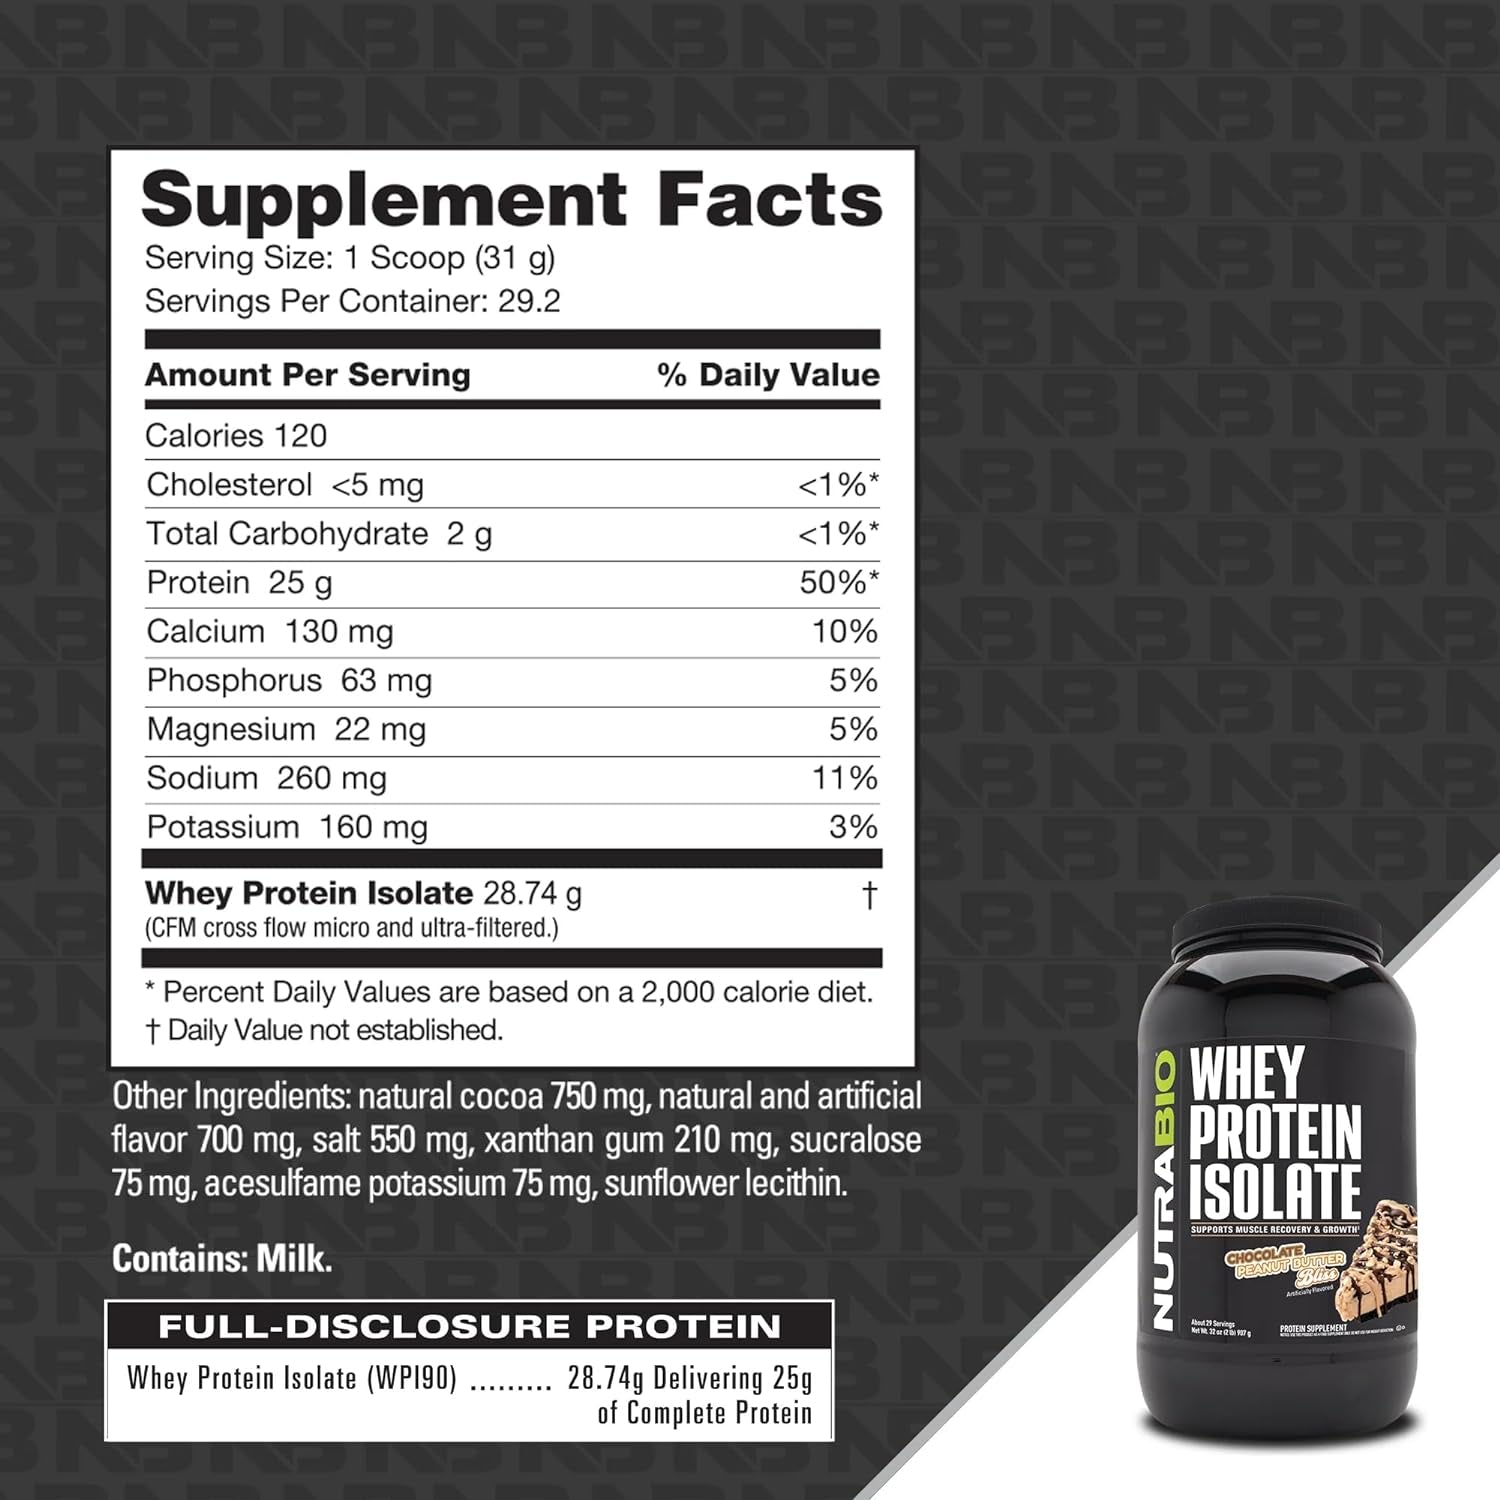 Whey Protein Isolate Supplement